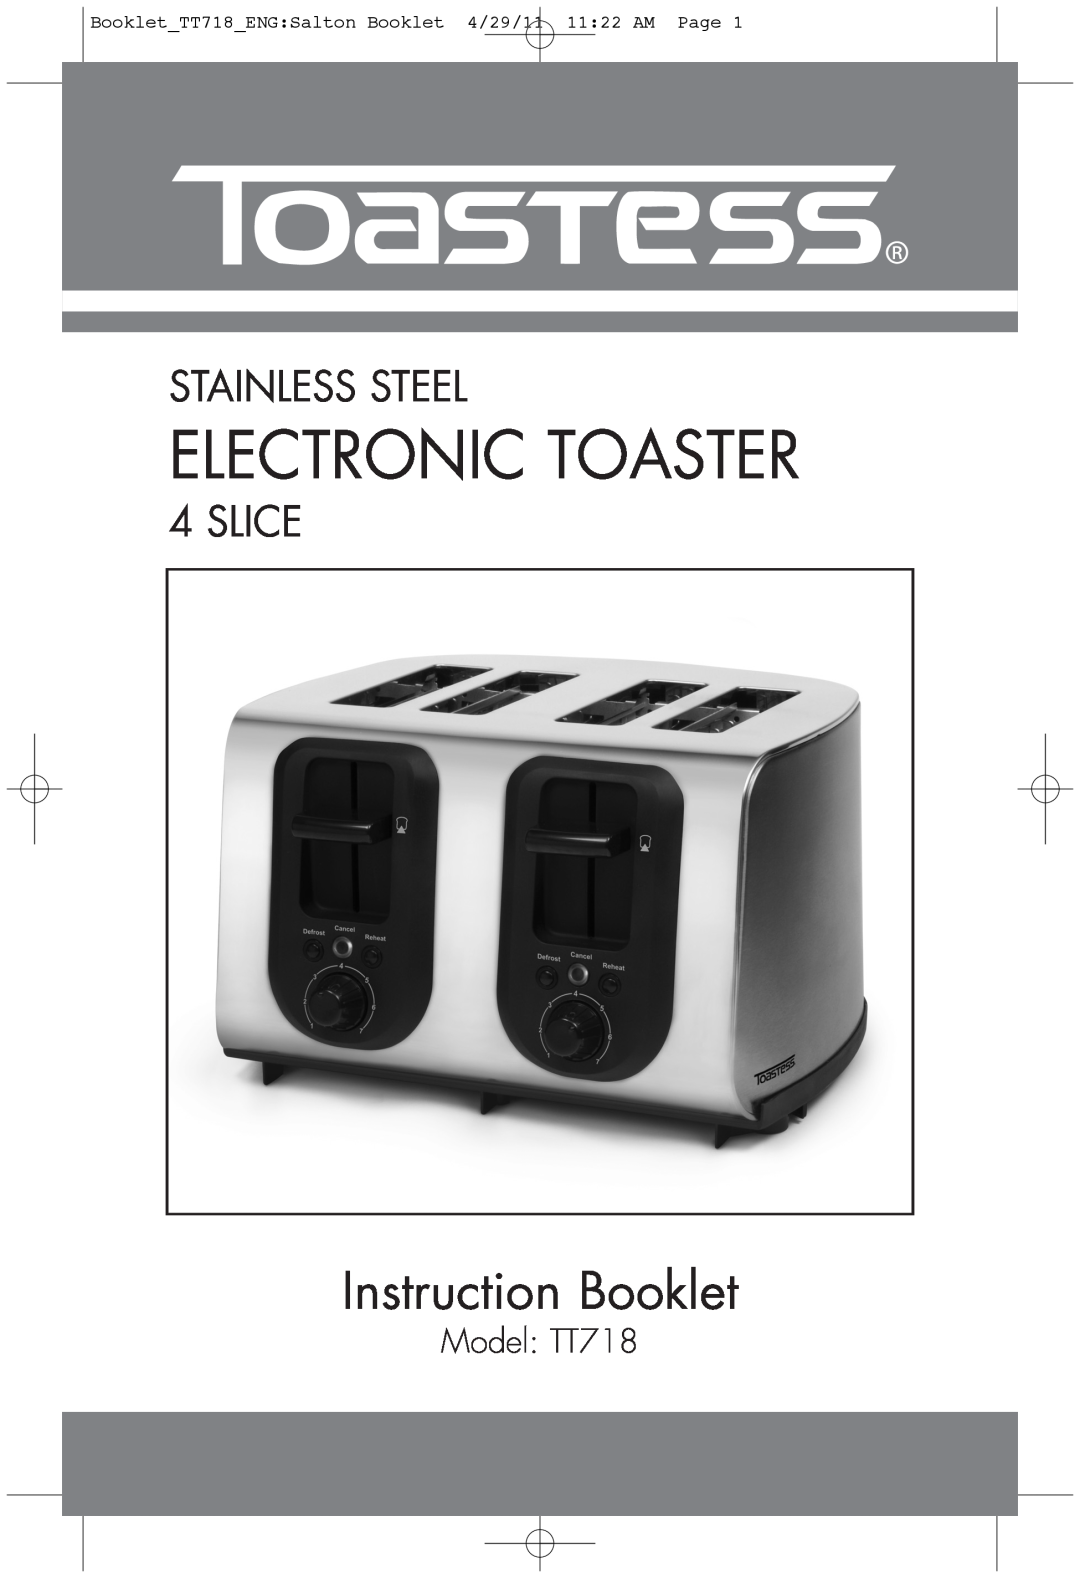 Toastess manual Electronic Toaster, Instruction Booklet, Stainless Steel, Slice, Model TT718 